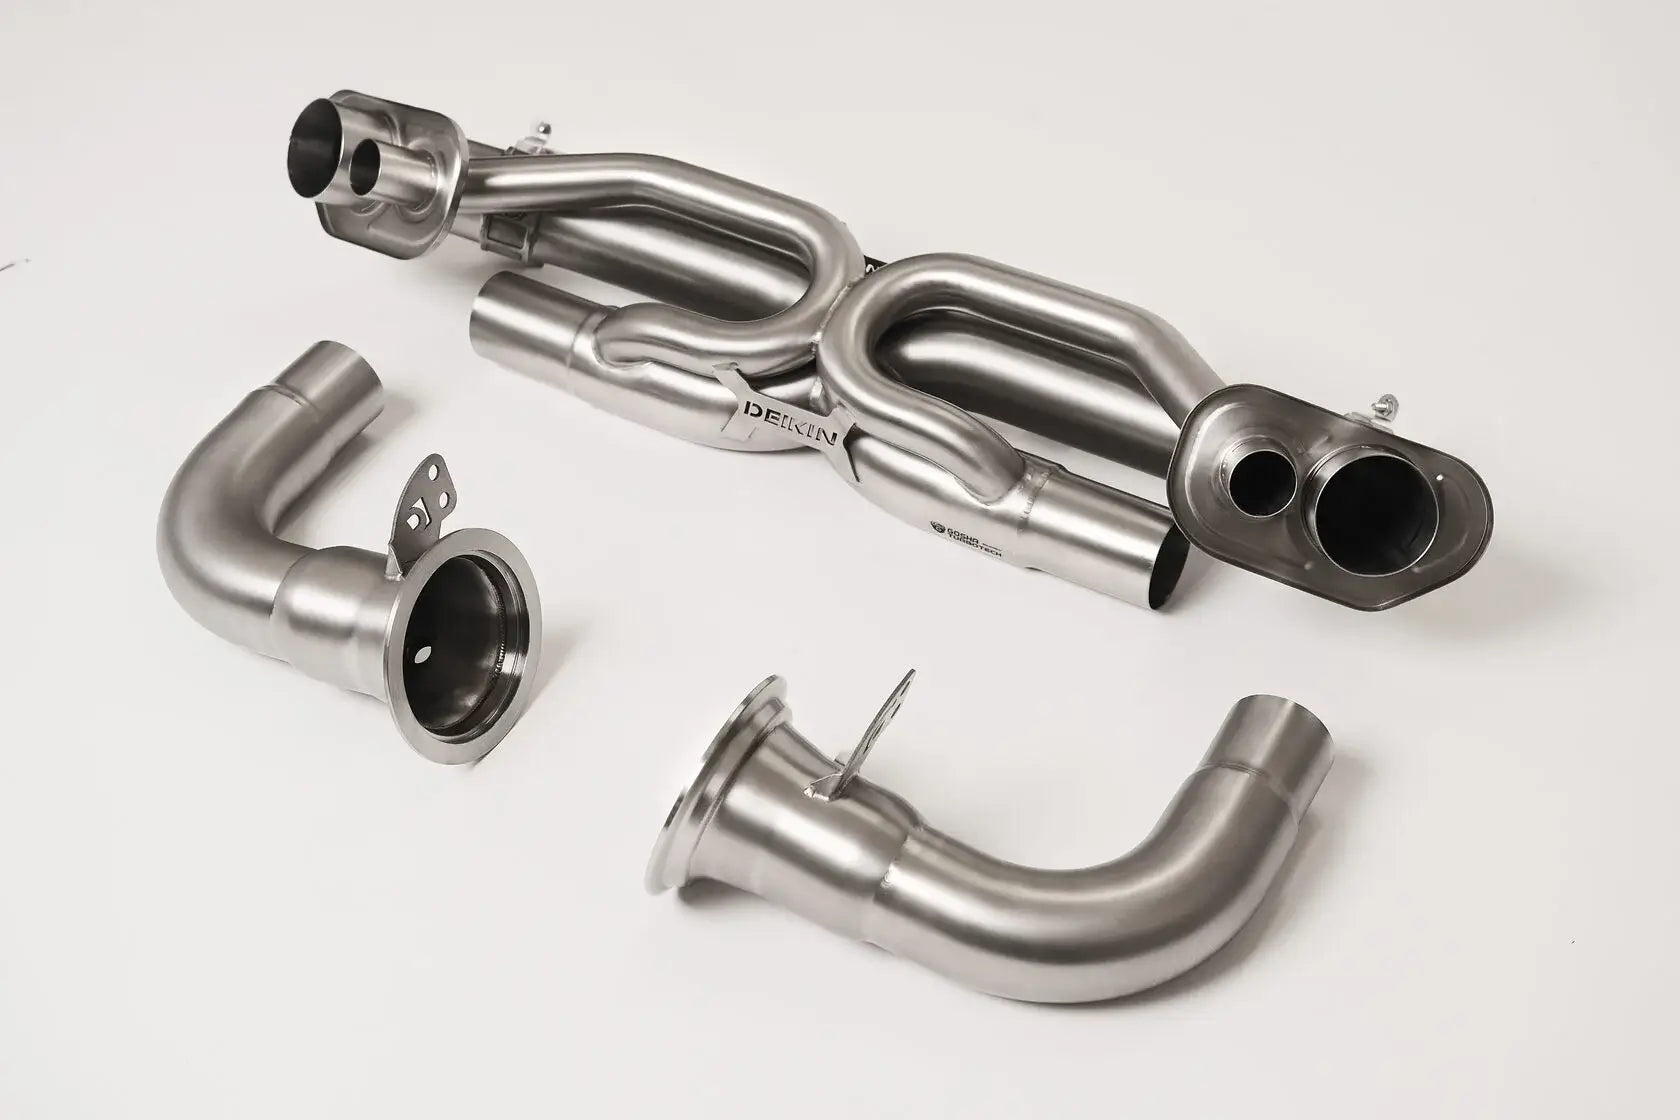 DEIKIN 10-PO.911.T/TS.992.R-ES-DP-Ti-00 Exhaust system "Race" Titan for Porsche 911 Turbo/Turbo S (992) complete with downpipes without HeatShield Photo-0 